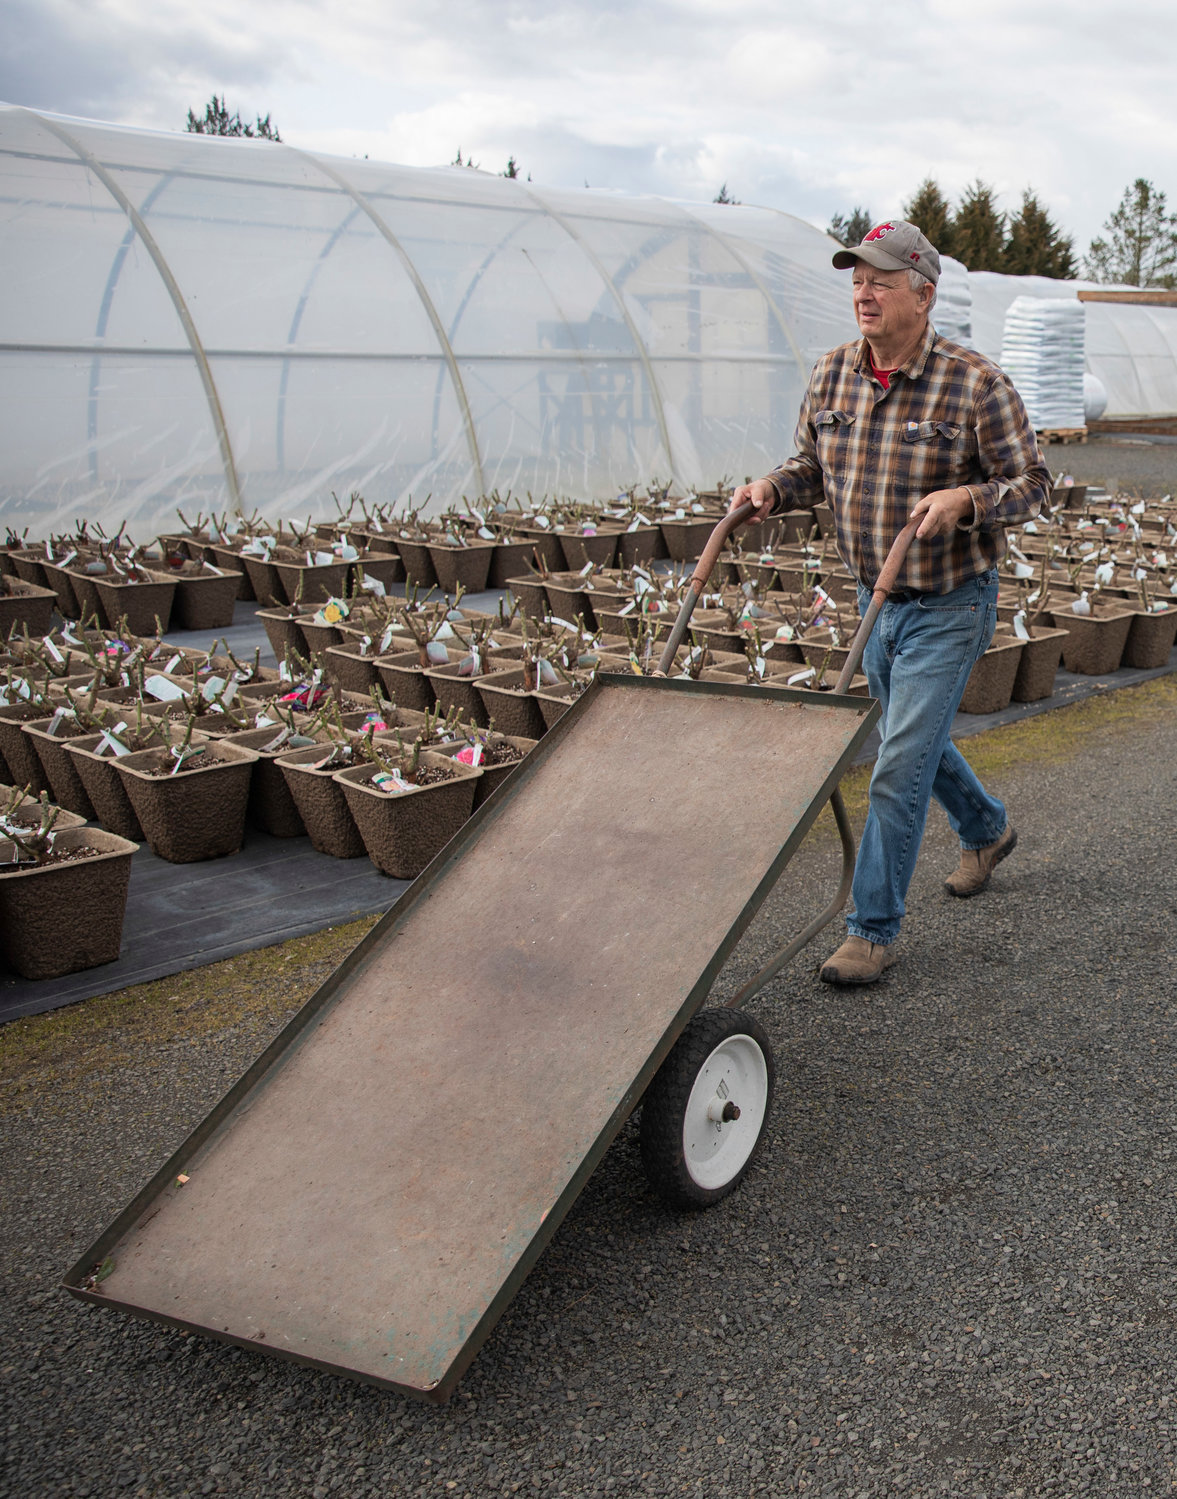 Spencer Davis pushes a cart enroute to pick up a delivery at the Dirty Thumb Nursery along state Route 6 near Adna.